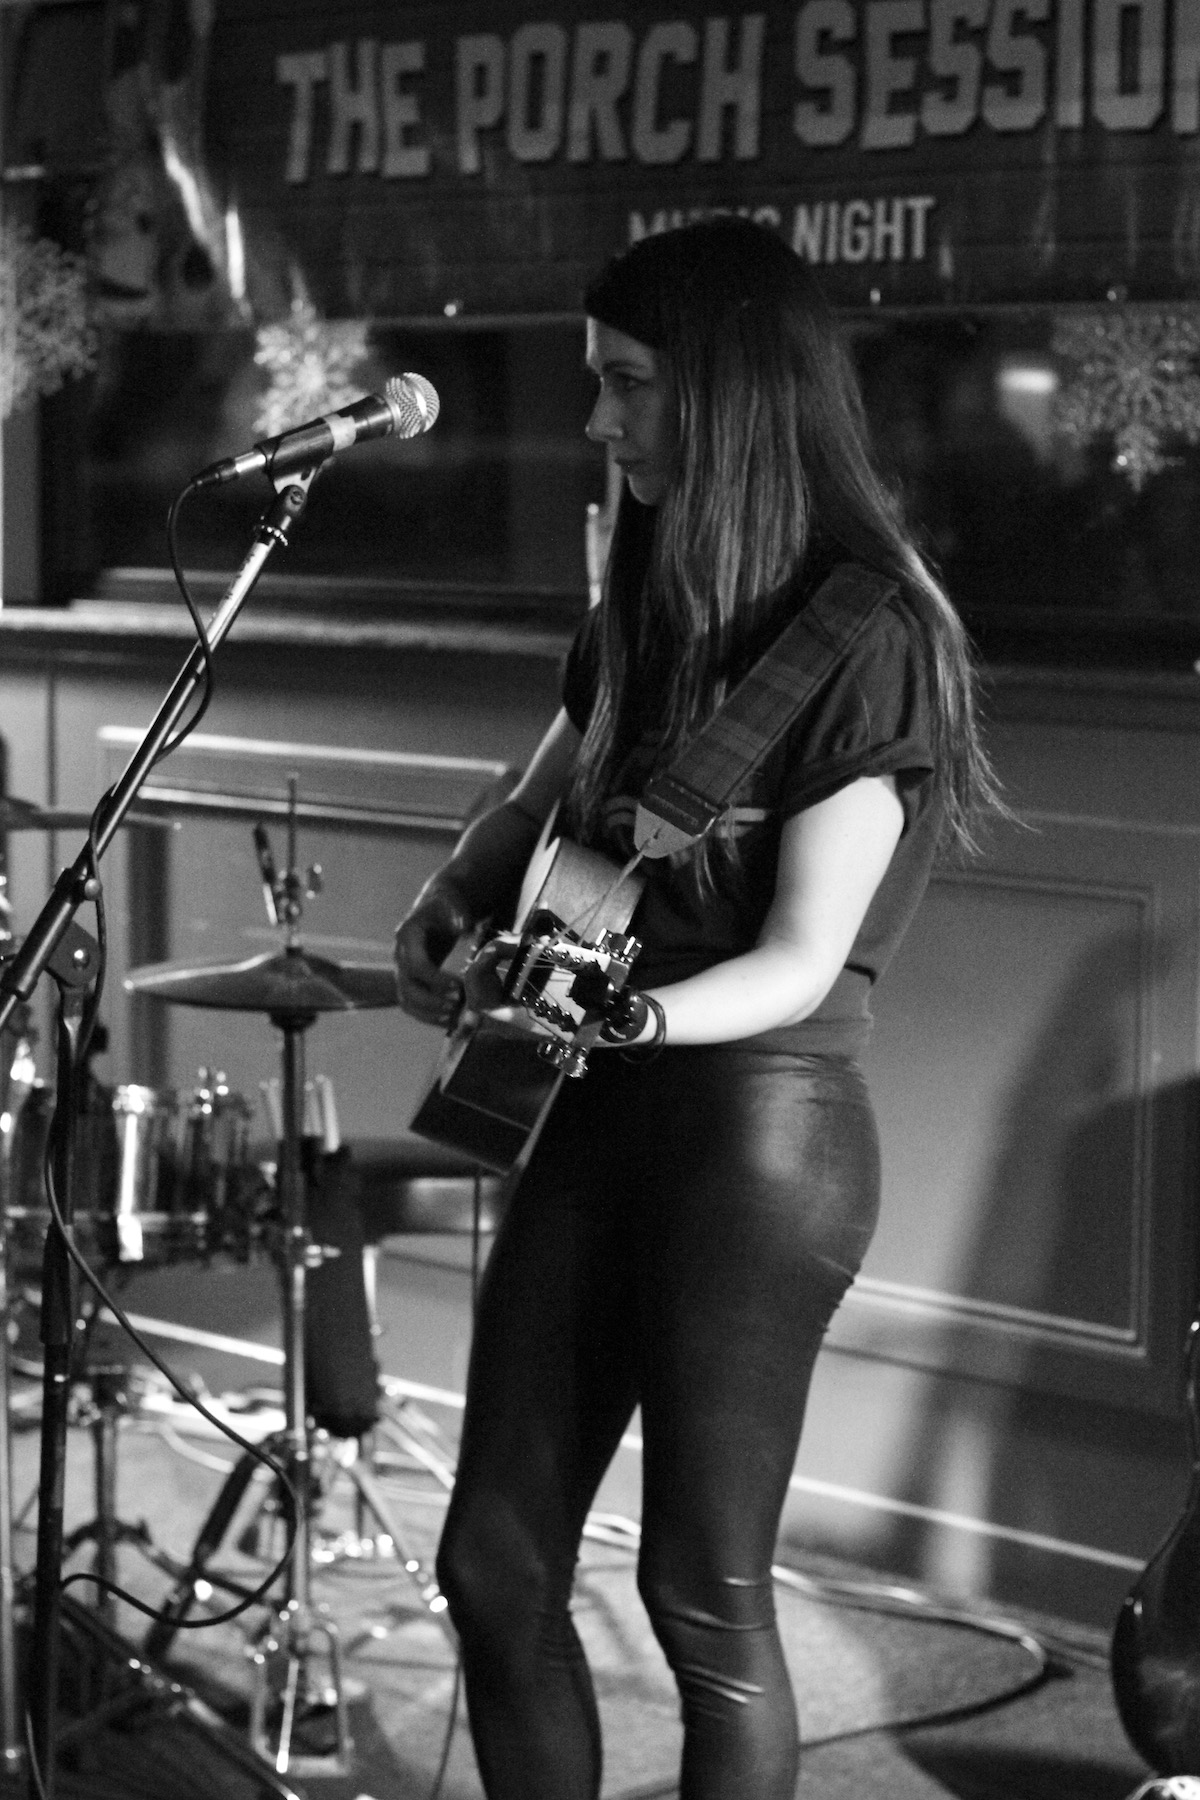 Lauren MacKenzie at The Porch Sessions Inverness December 20183055 - The Porch Sessions, 8/12/2018 - Images